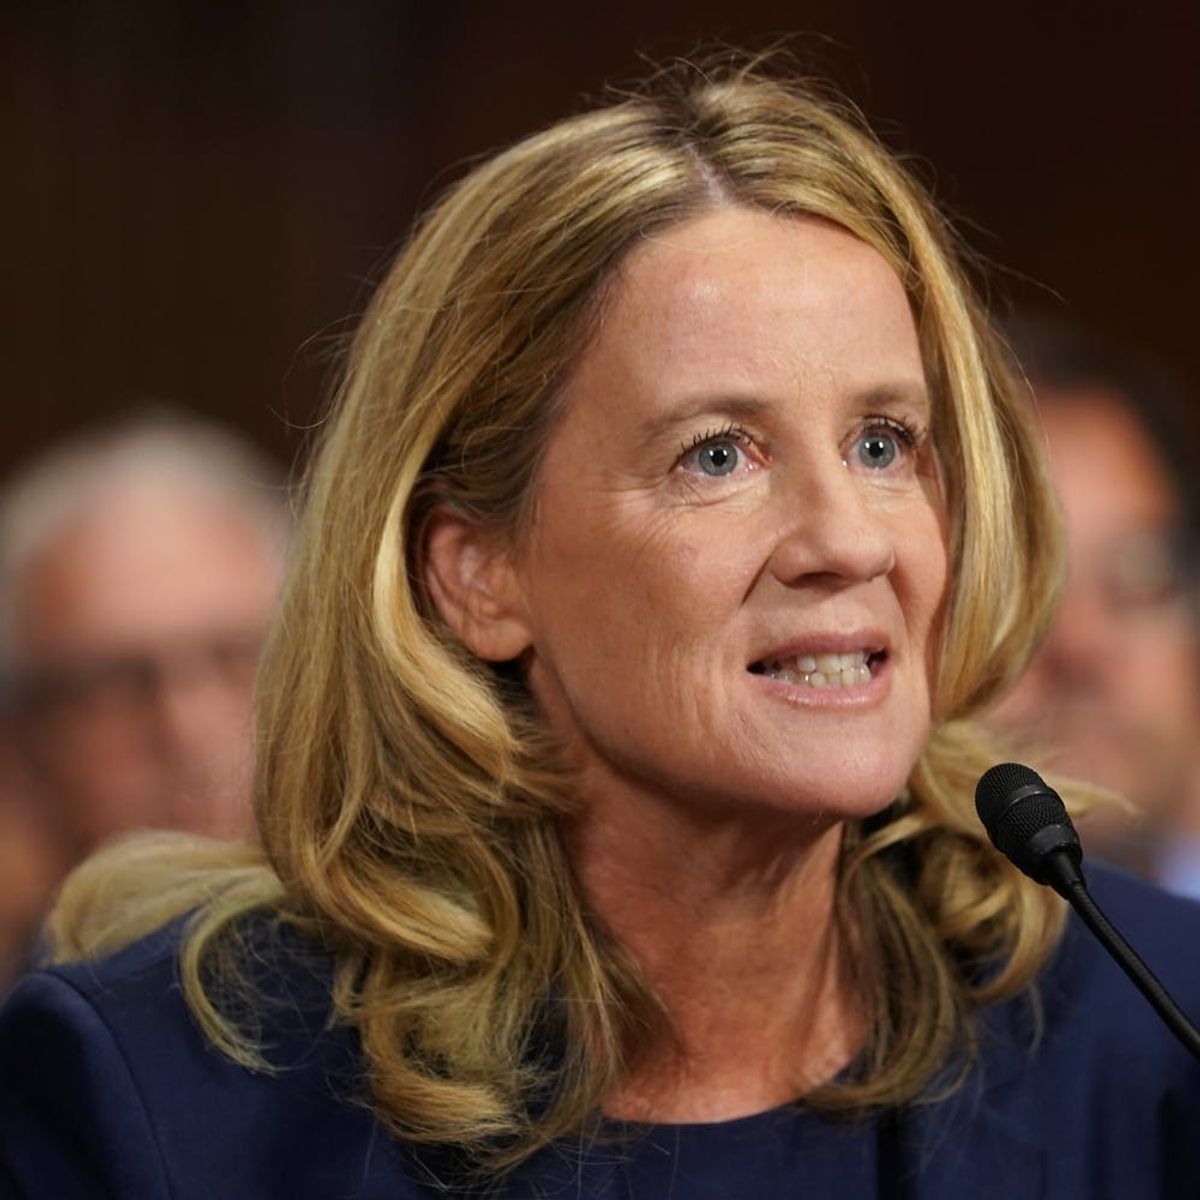 Dr. Christine Blasey Ford Just Gave Everyone an Important Psychology Lesson